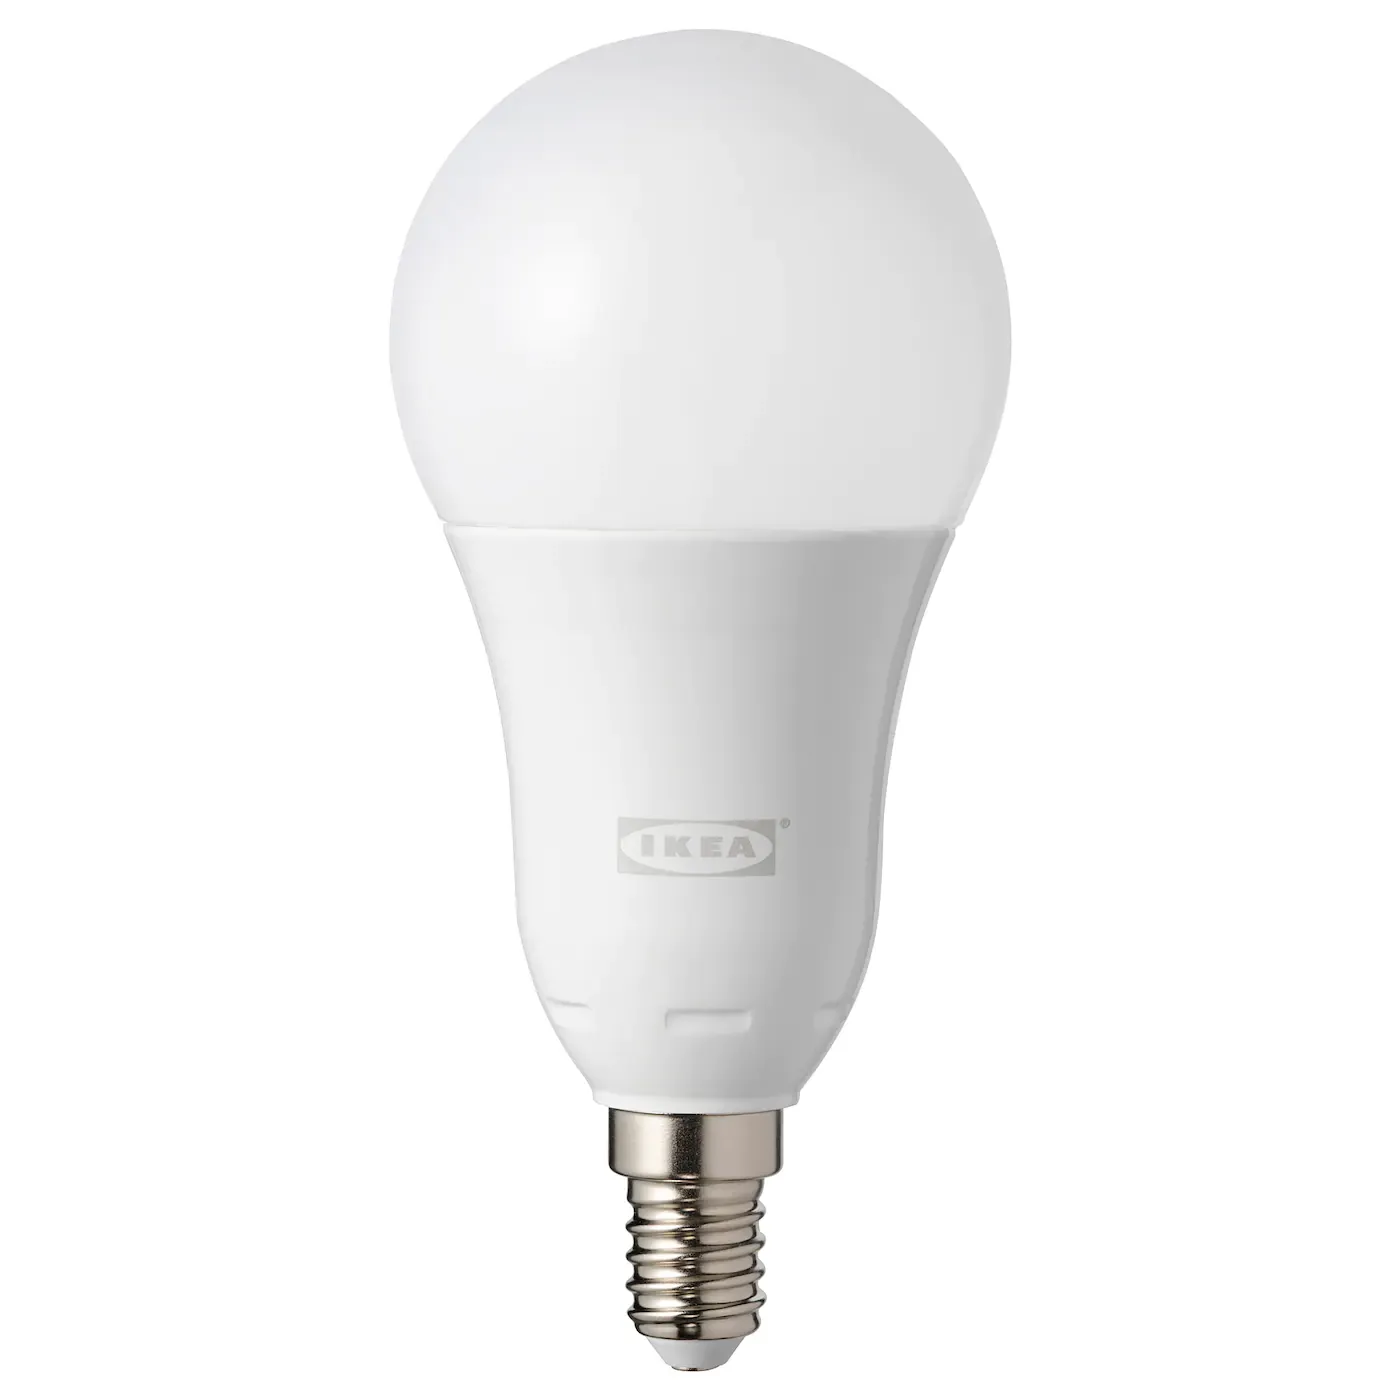 Tradfri LED bulb E14 600lm, dimmable color and white spectrum opal